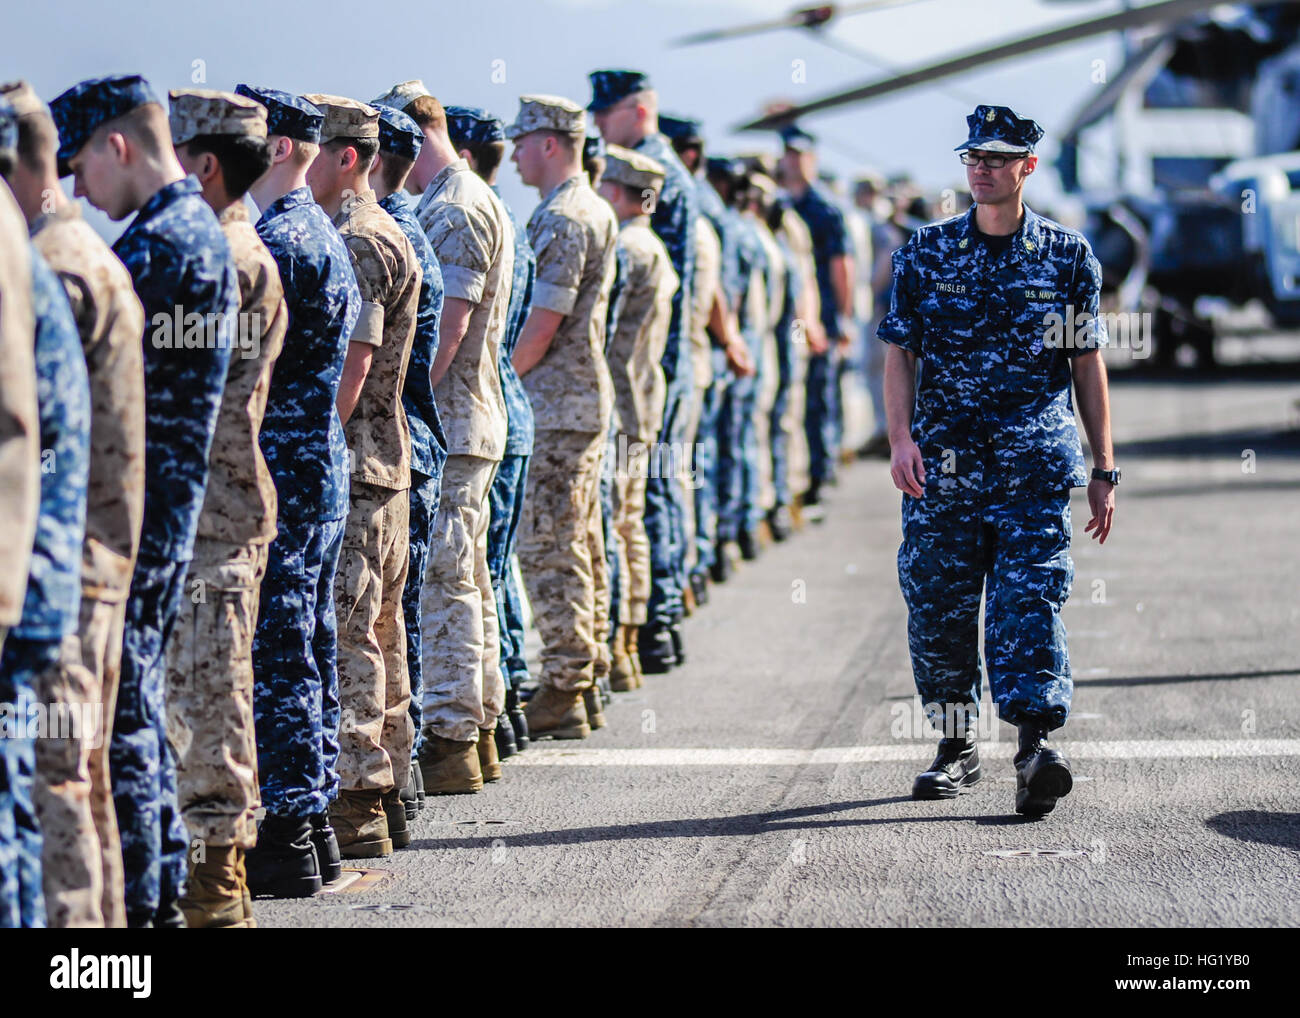 Chief Yeoman Mike Trisler supervises as Sailors and Marines aboard to the amphibious assault ship USS Boxer (LHD 4) man the rails as they arrive in Pearl Harbor, Hawaii. Boxer is the flagship for the Boxer Amphibious Ready Group and, with the embarked 13th Marine Expeditionary Unit, is currently returning to its homeport of San Diego from an eight-month deployment to the western Pacific and the U.S. Central Command areas of responsibility. (U.S. Navy photo by Mass Communication Specialist Seaman Veronica Mammina/Released) USS Boxer operations 140415-N-GM561-082 Stock Photo